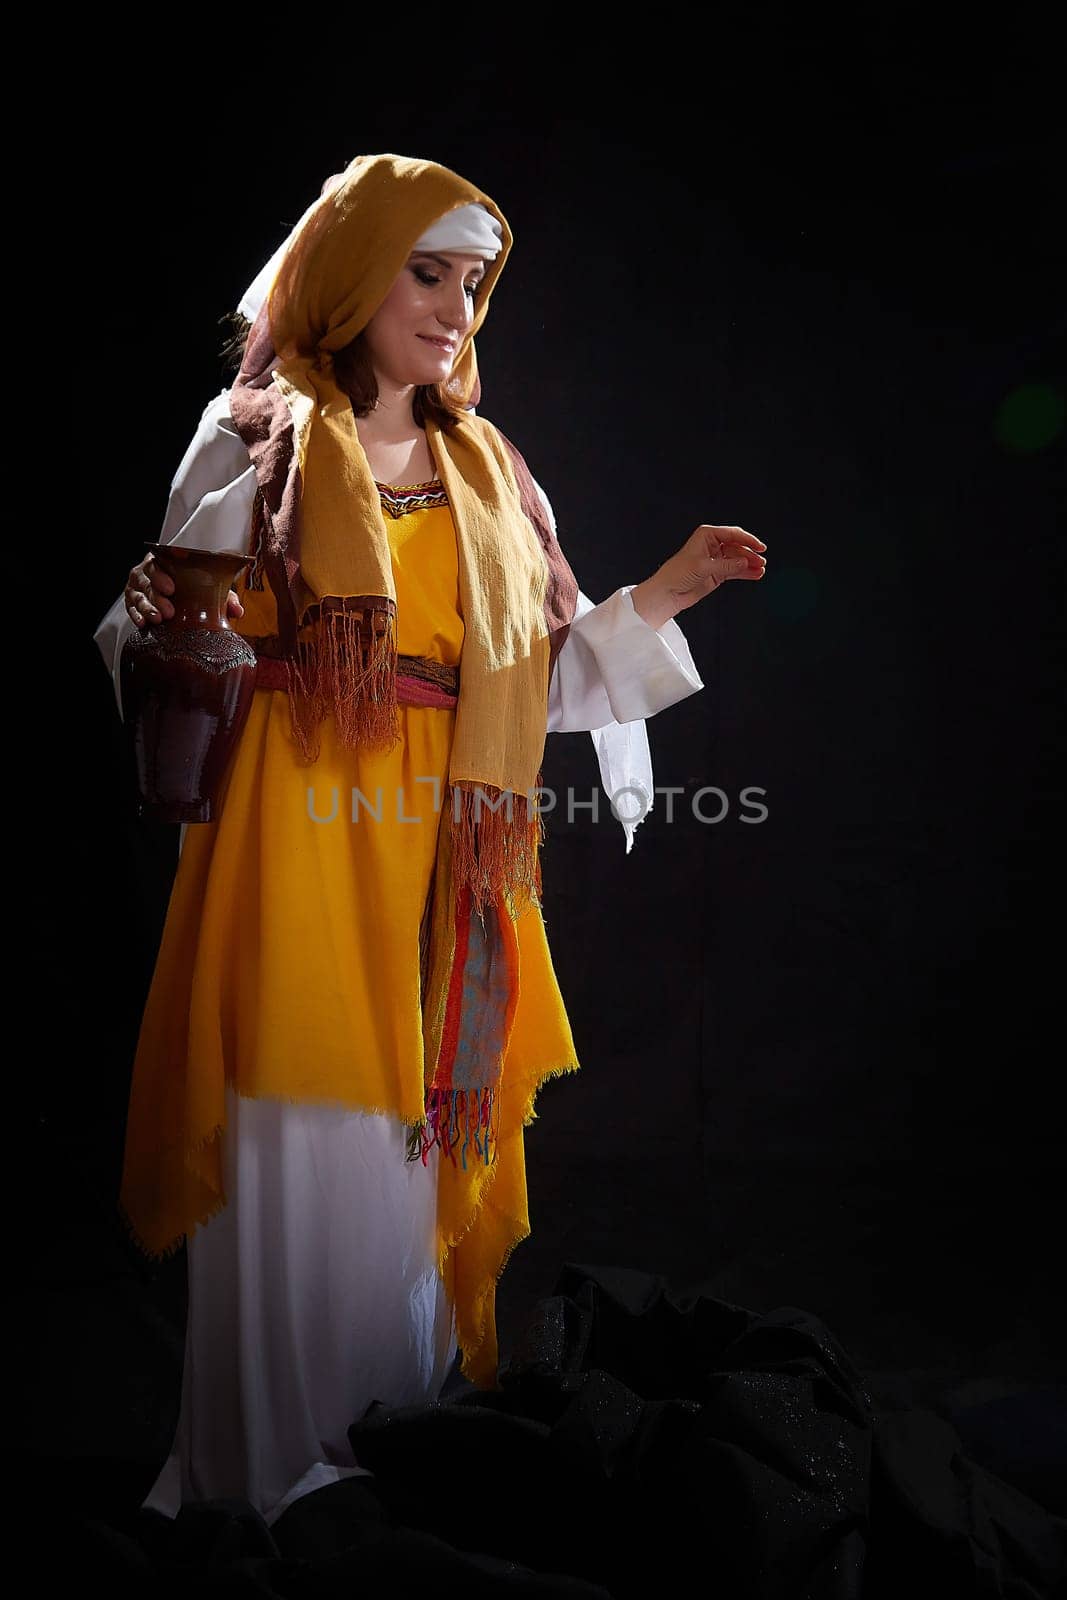 A girl or a young woman from ancient Israel, Palestine, Iran, Iraq with a clay jug. A biblical story with Rebekah and water. Stylized photo shoot with a model in Middle Eastern clothes by keleny